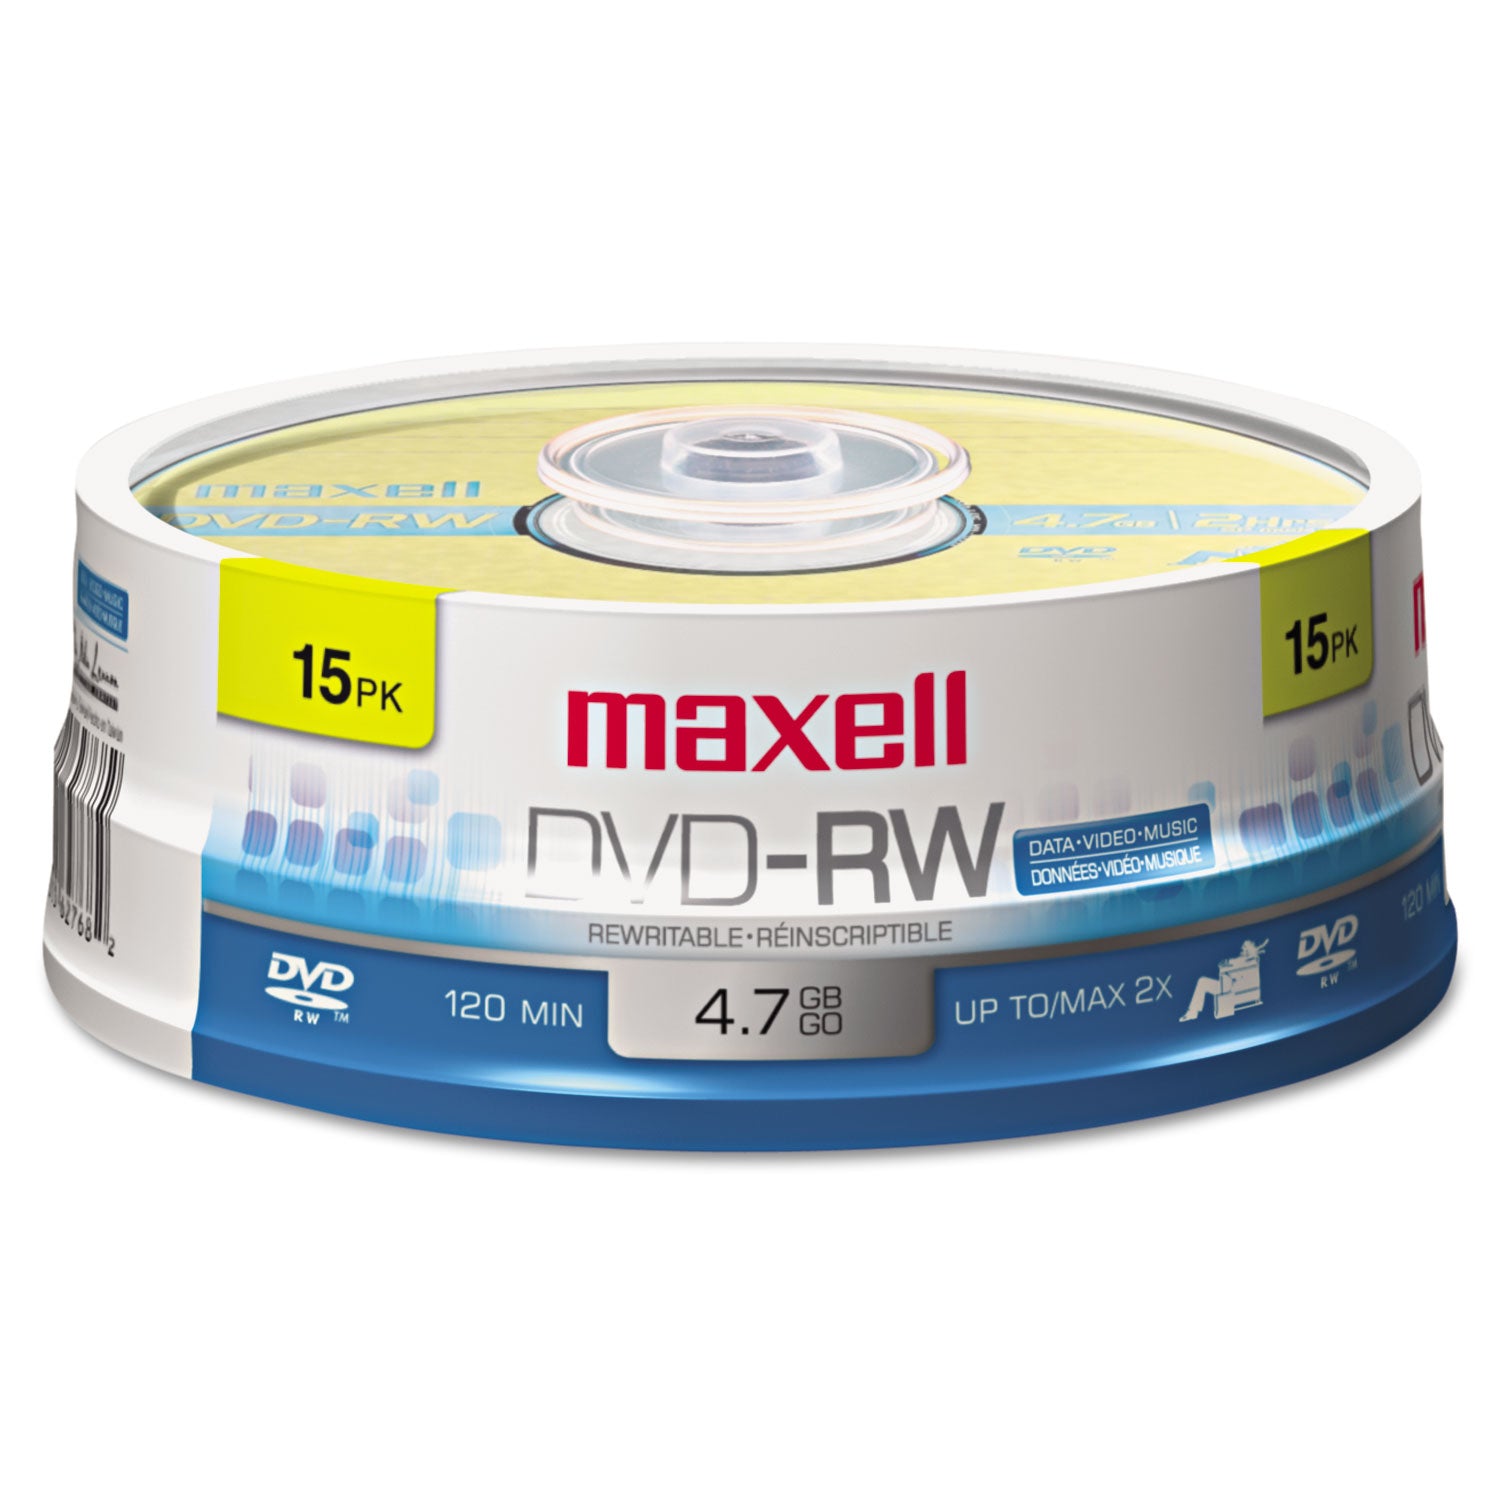 DVD-RW Rewritable Disc, 4.7 GB, 2x, Spindle, Gold, 15/Pack - 